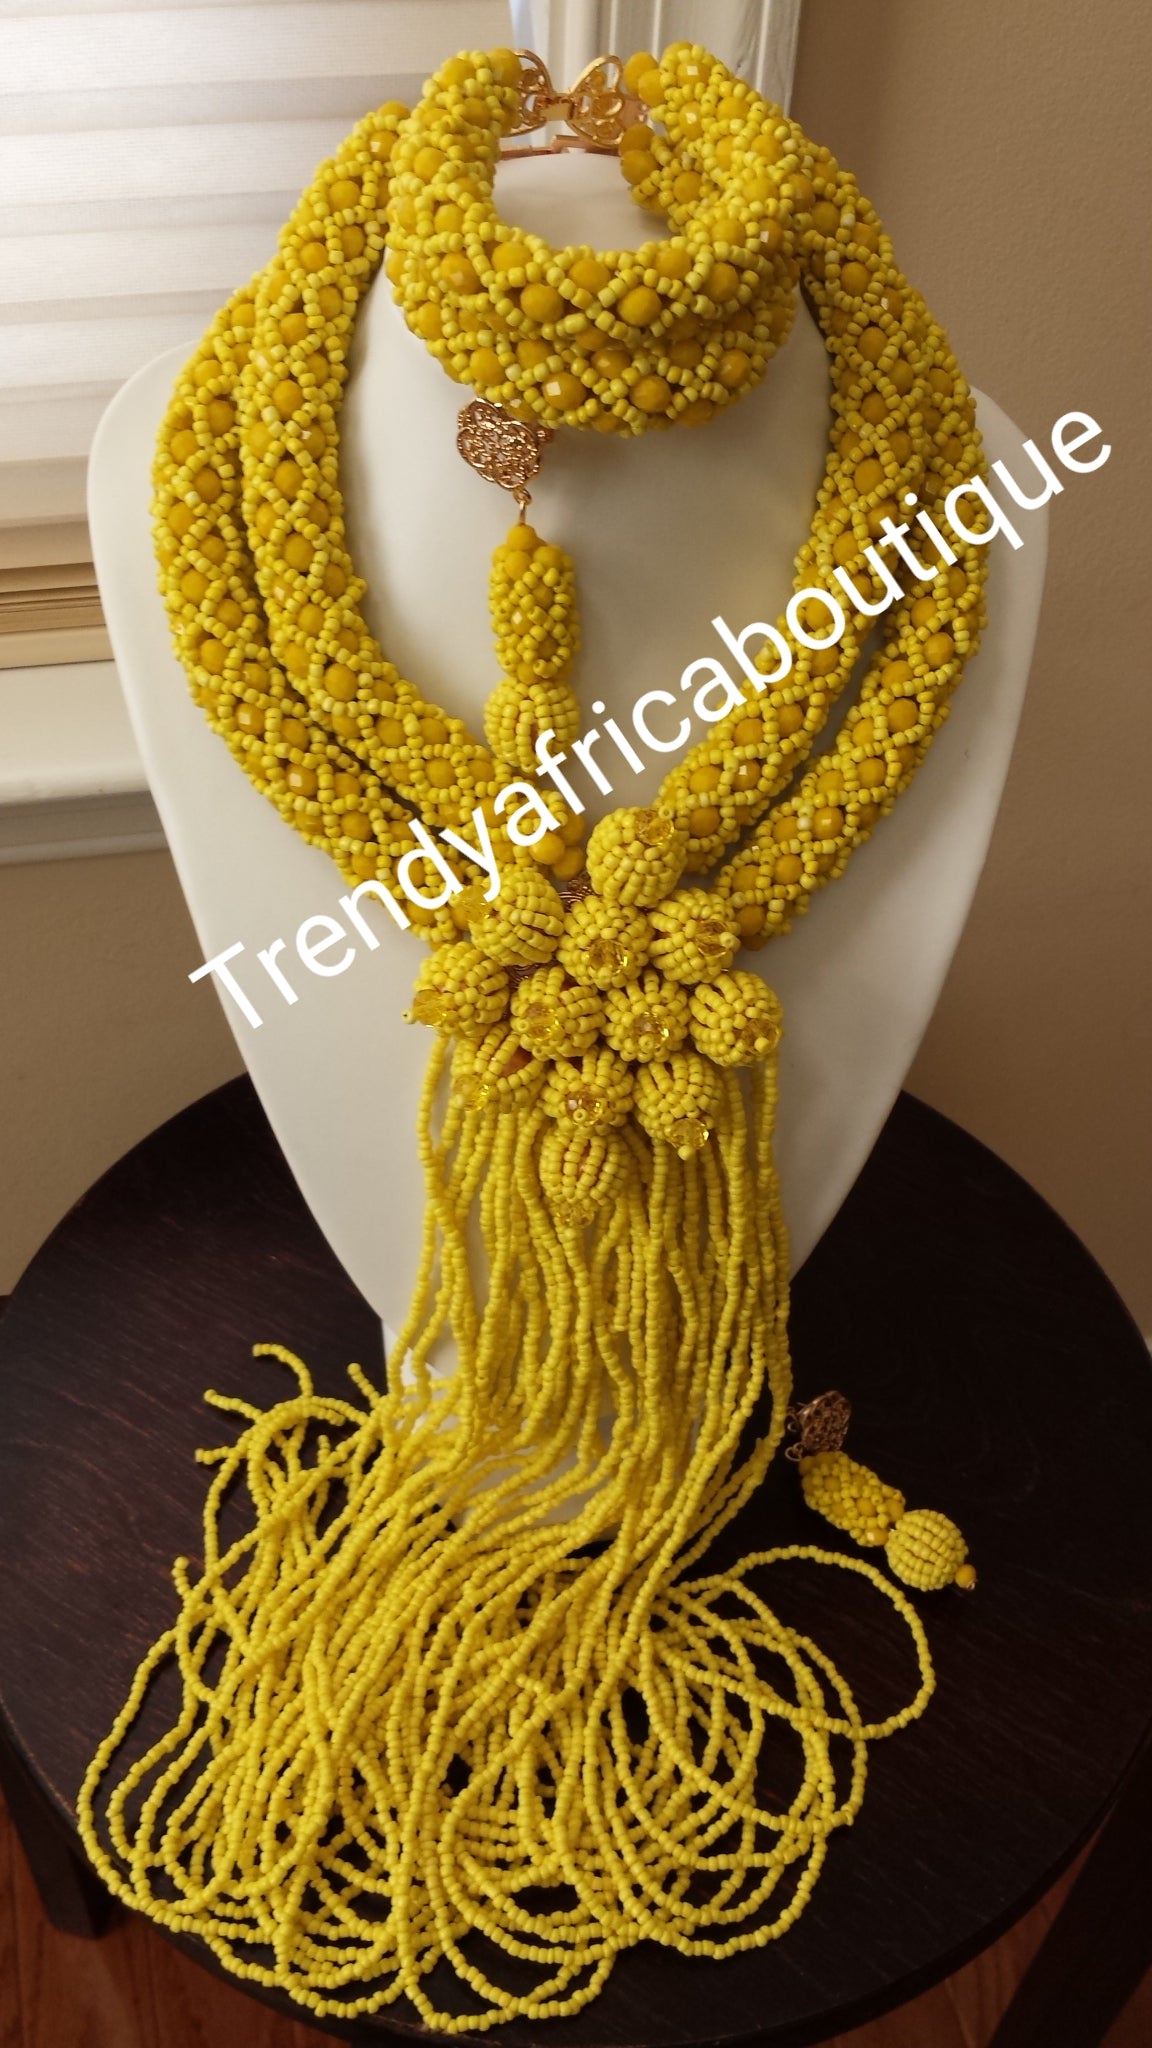 Sale, sale:  Elegant yellow beaded necklace set with multi-dropping. Classic design. Coral-necklace set for African party.